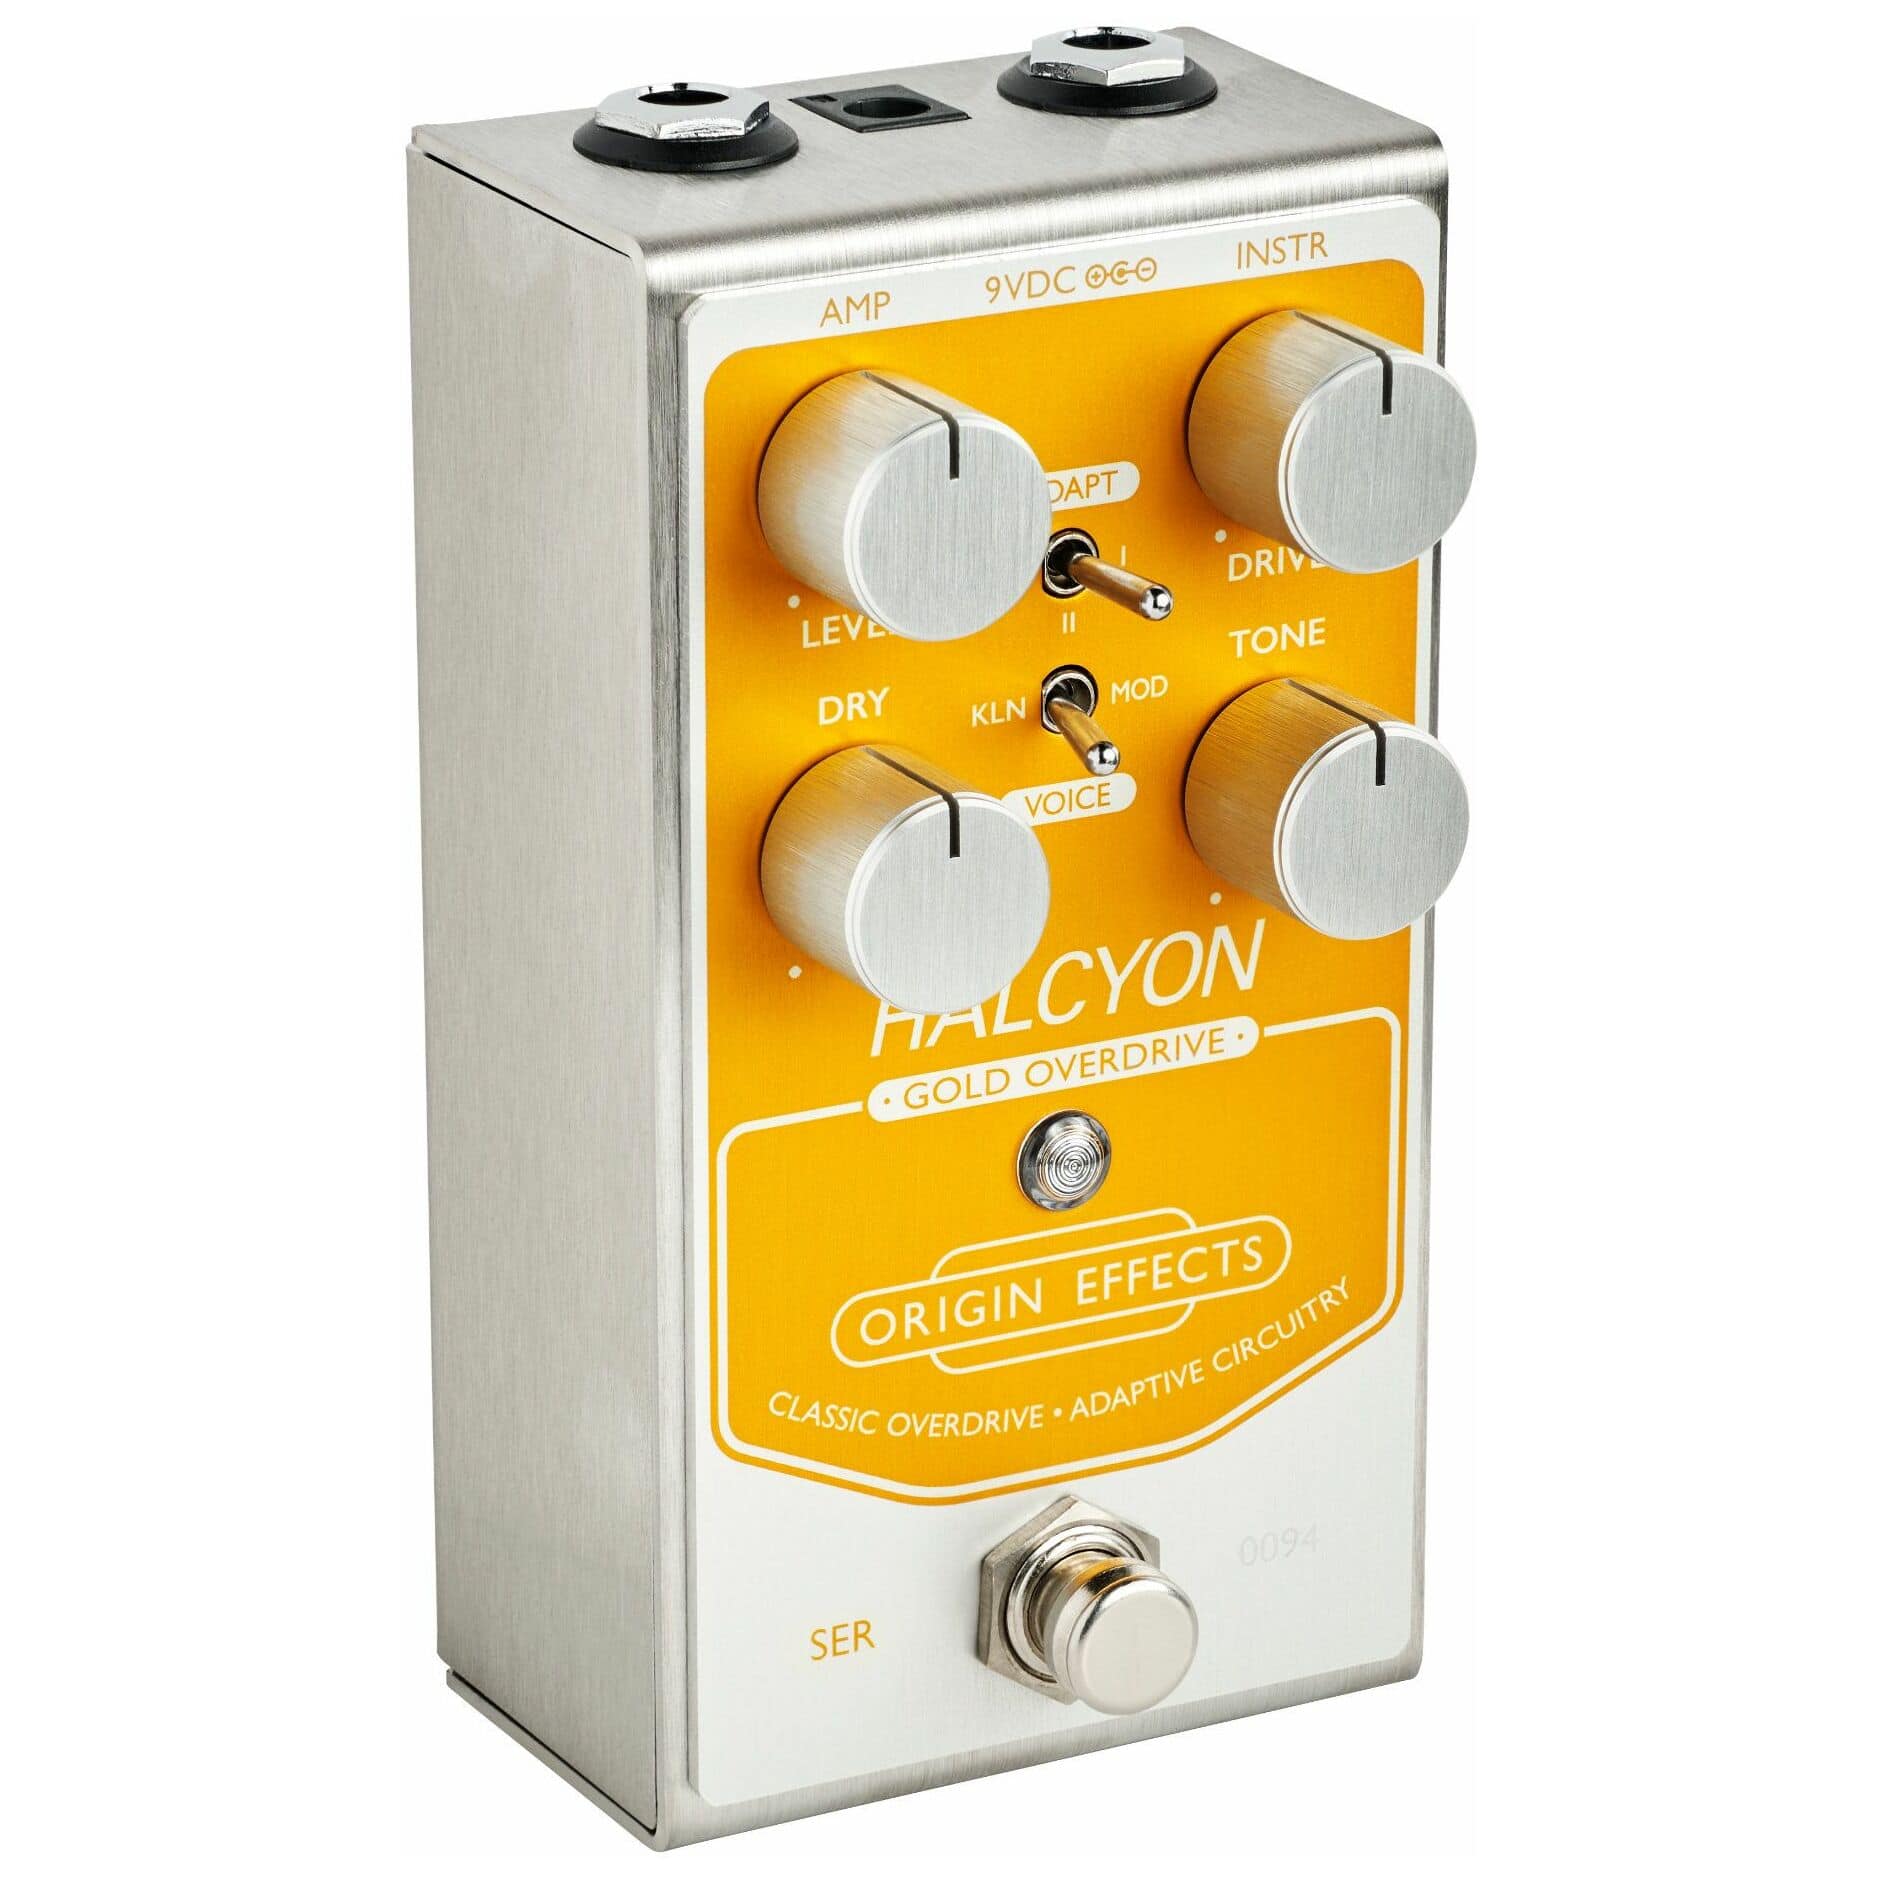 Origin Effects Halcyon Gold Overdrive 2